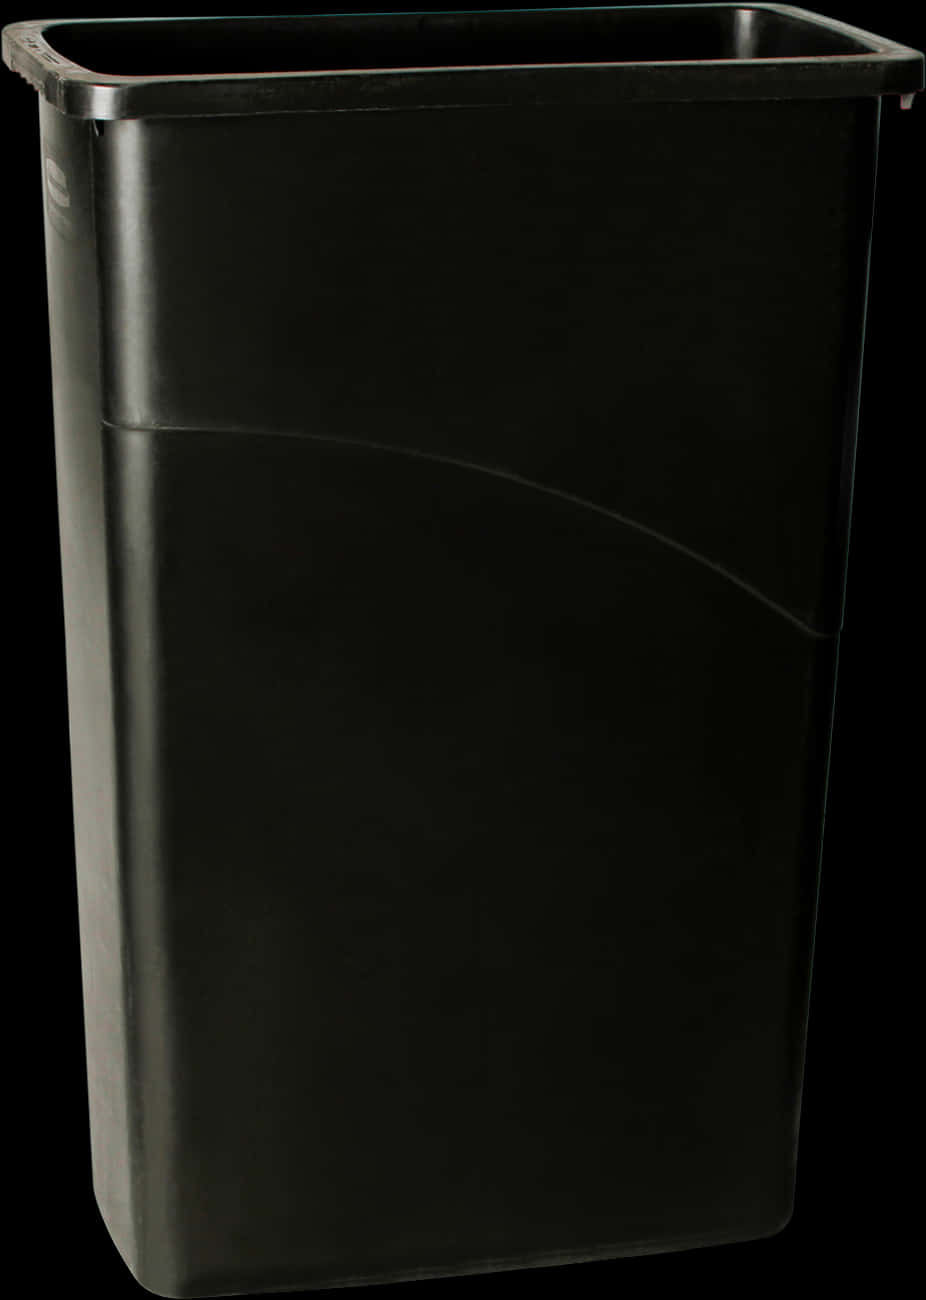 A Black Rectangular Object With A Black Cover